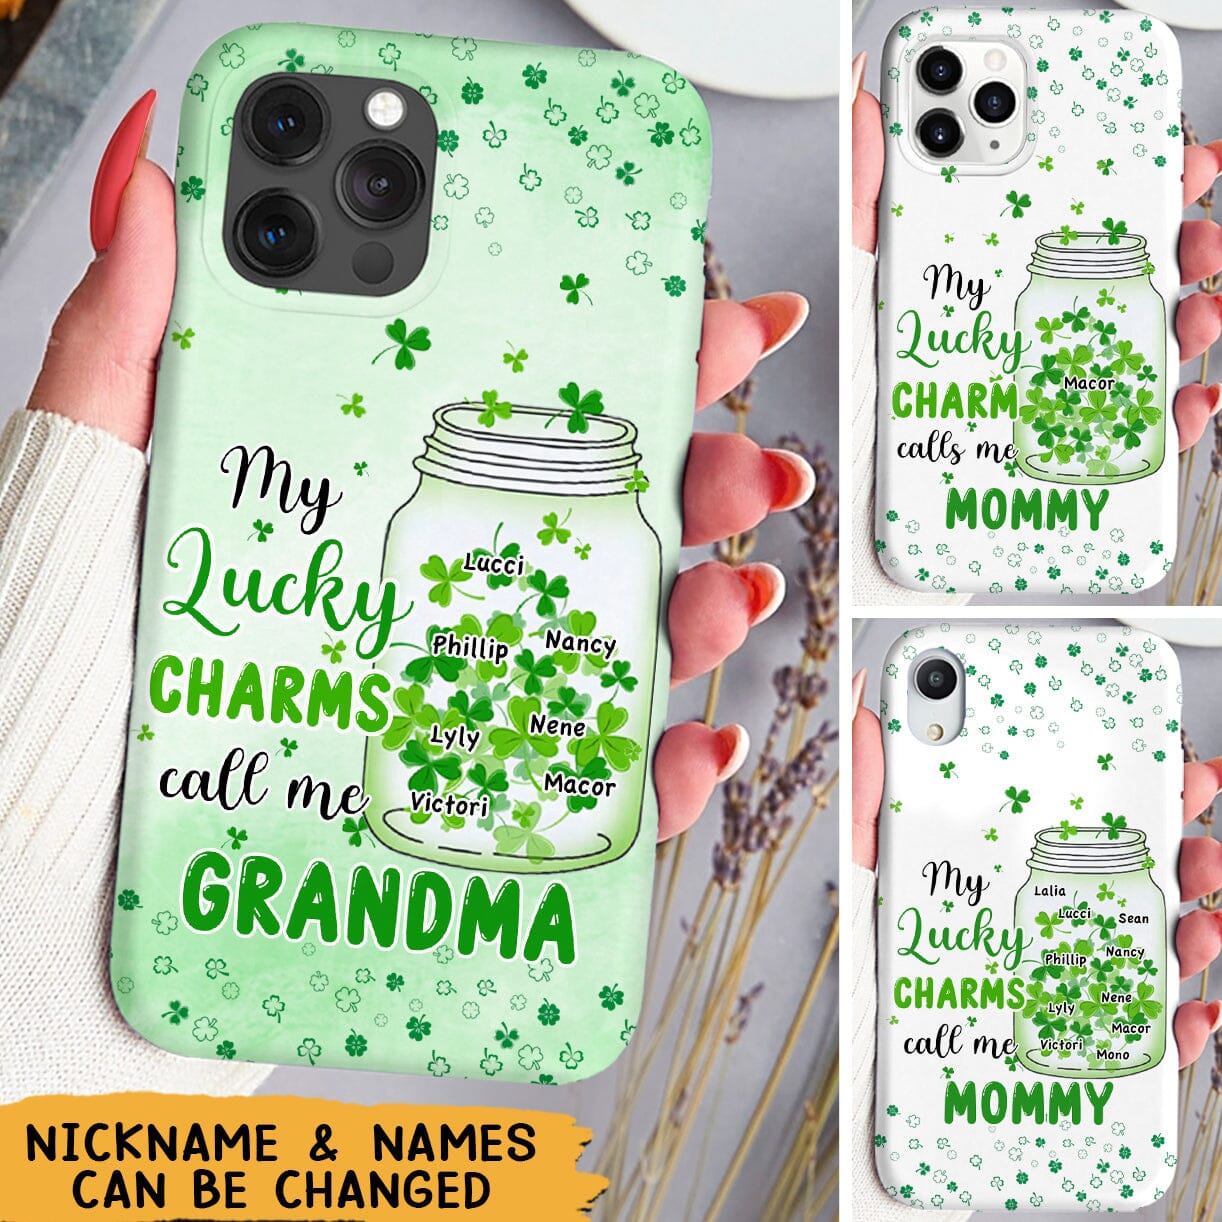 My lucky charms call me Grandma St Patrick's Day Personalized Phone case